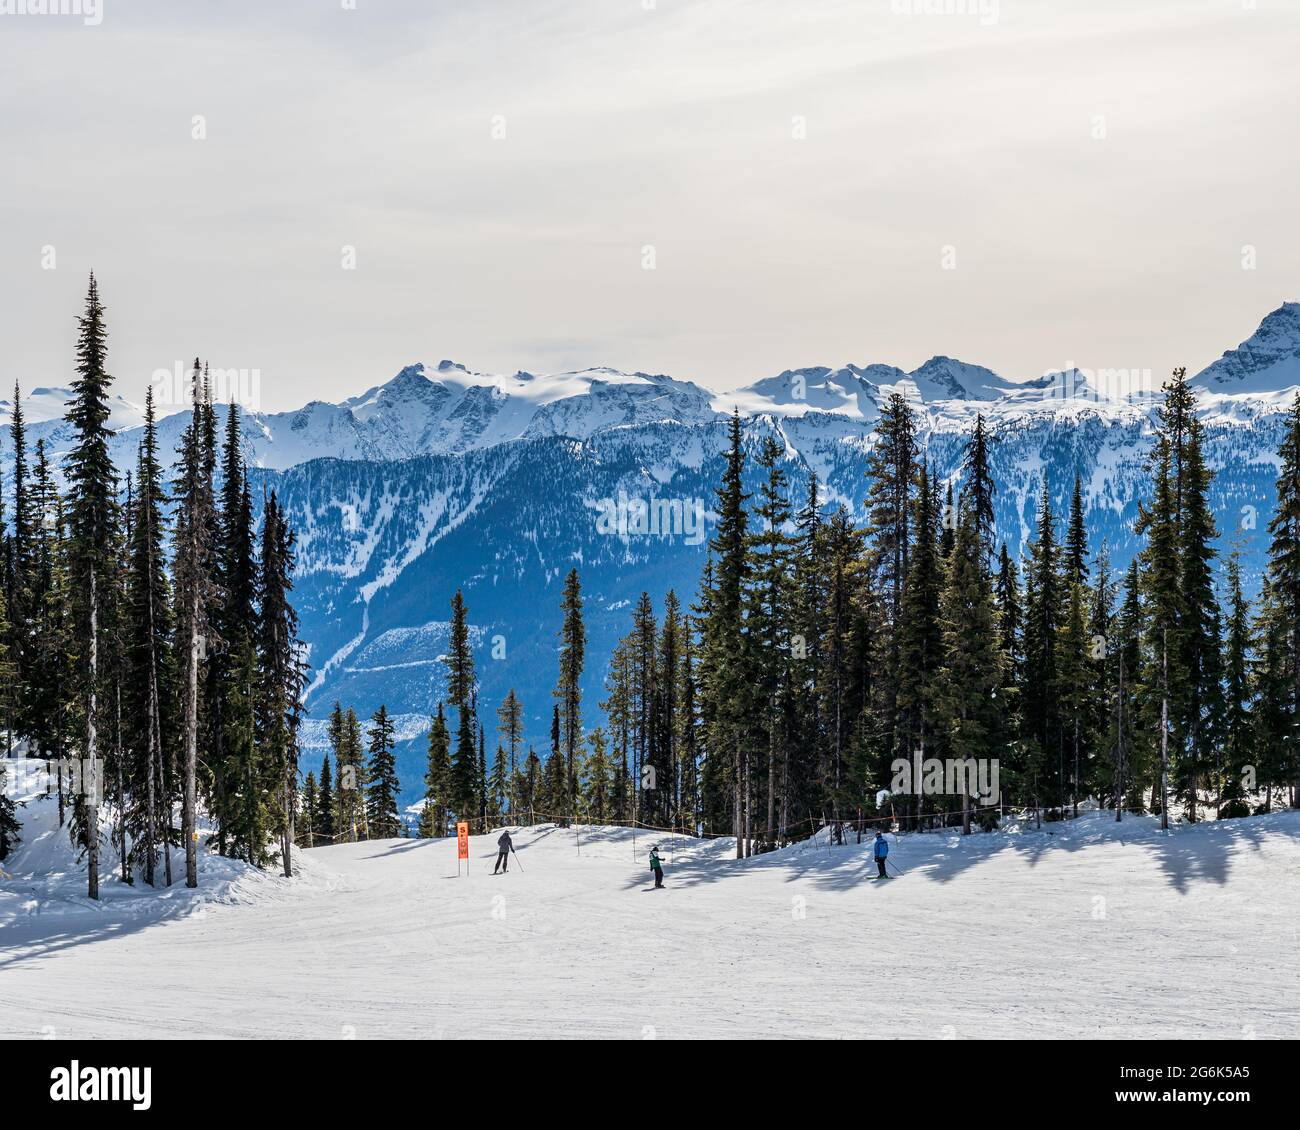 REVELSTOKE, CANADA - MARCH 17, 2021: Skiers and snowboarders going down the slope in canadian mountains Stock Photo